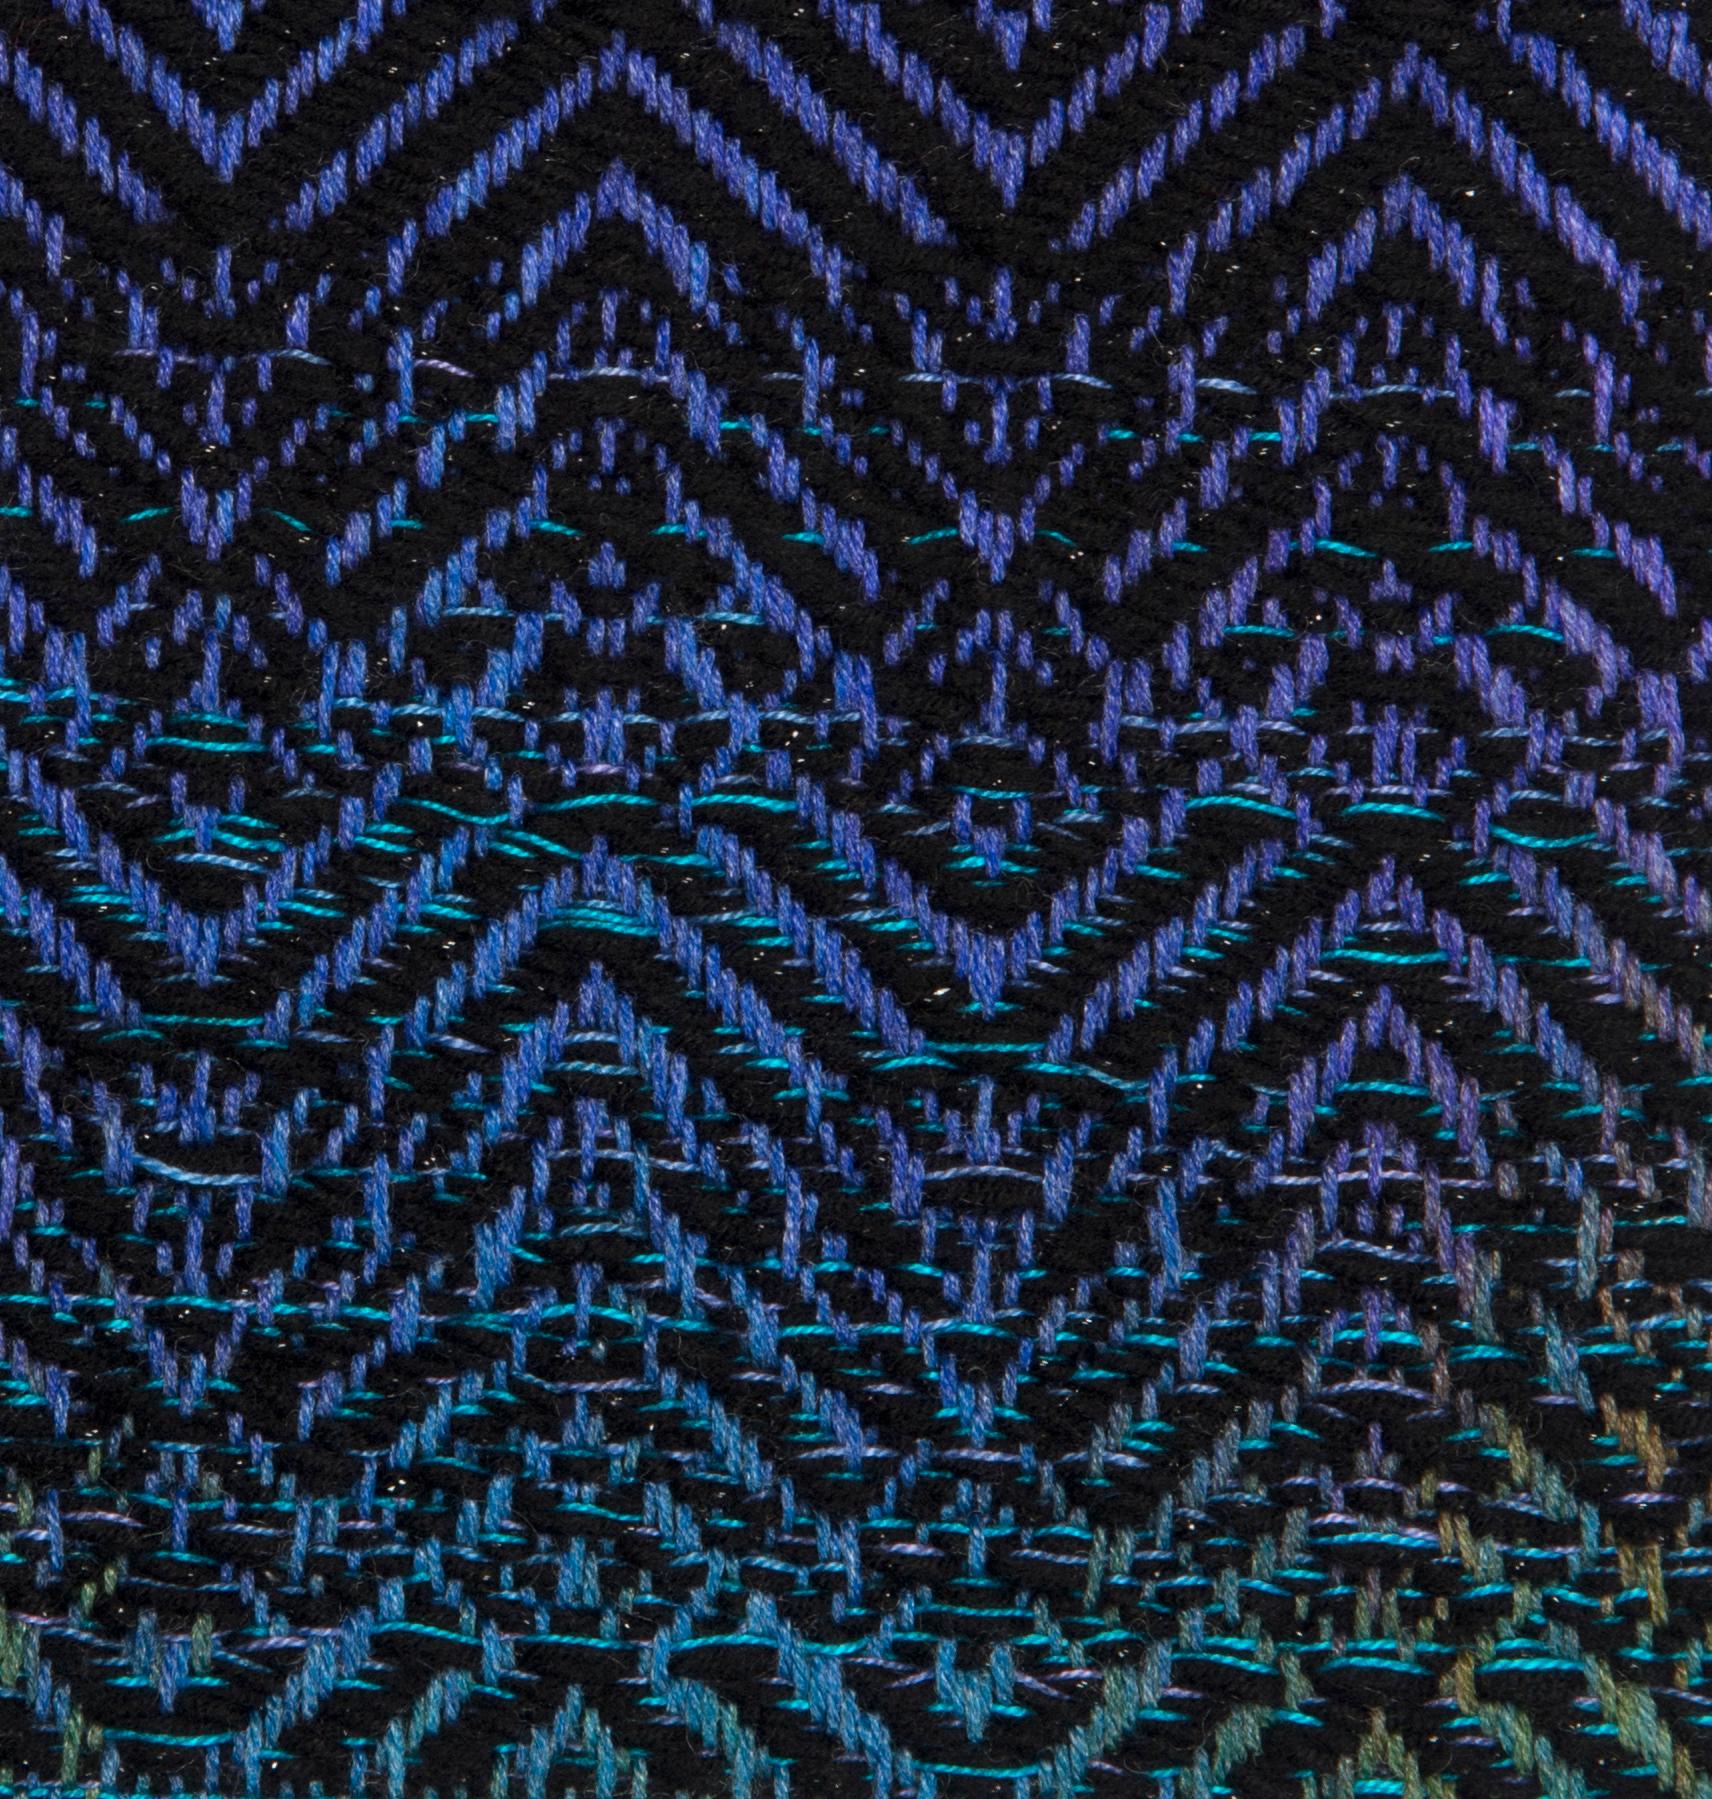 Ronel: Strength, 2015. Worsted Merino with Acrylic Yarn hand dyed, woven on Digital Dobby Loom.

Born in Namibia, Lynette Diergaardt received her Bachelors of Art from the University of Namibia and her Masters in Textiles as a Fulbright Scholar at